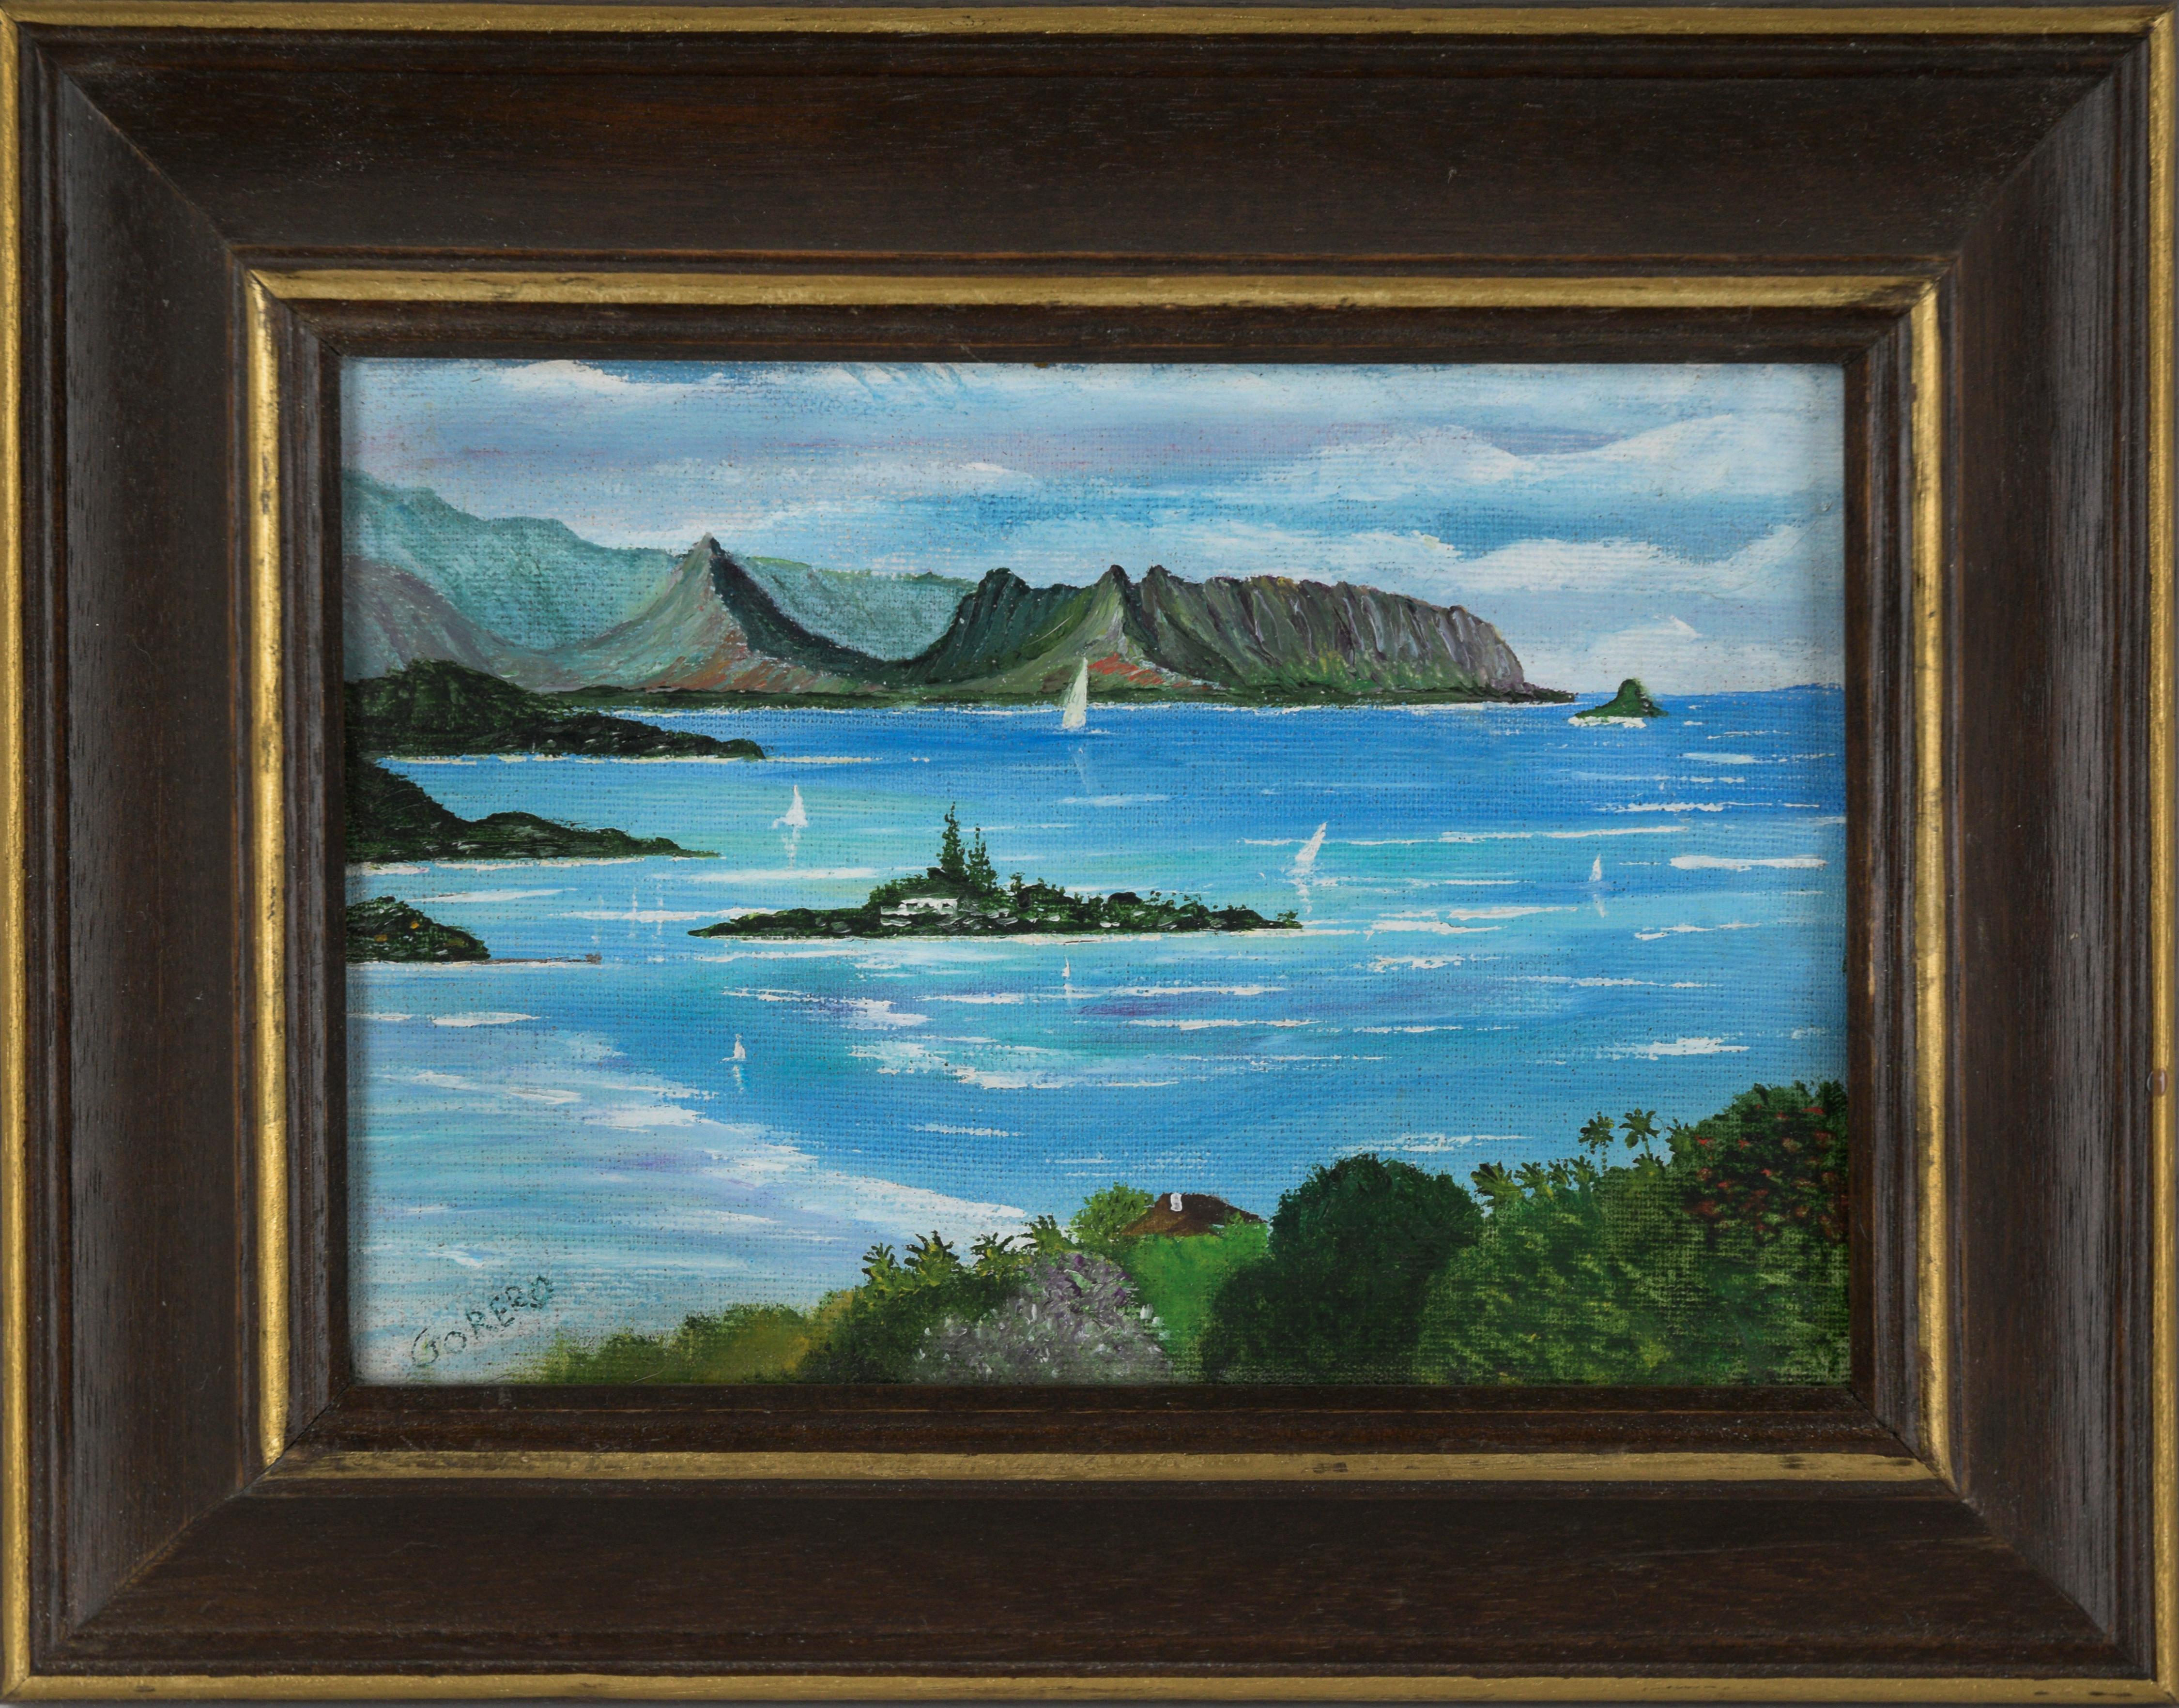 Gorero Landscape Painting - Kaneohe Bay, Hawaii 1989 - Oil on Canvas